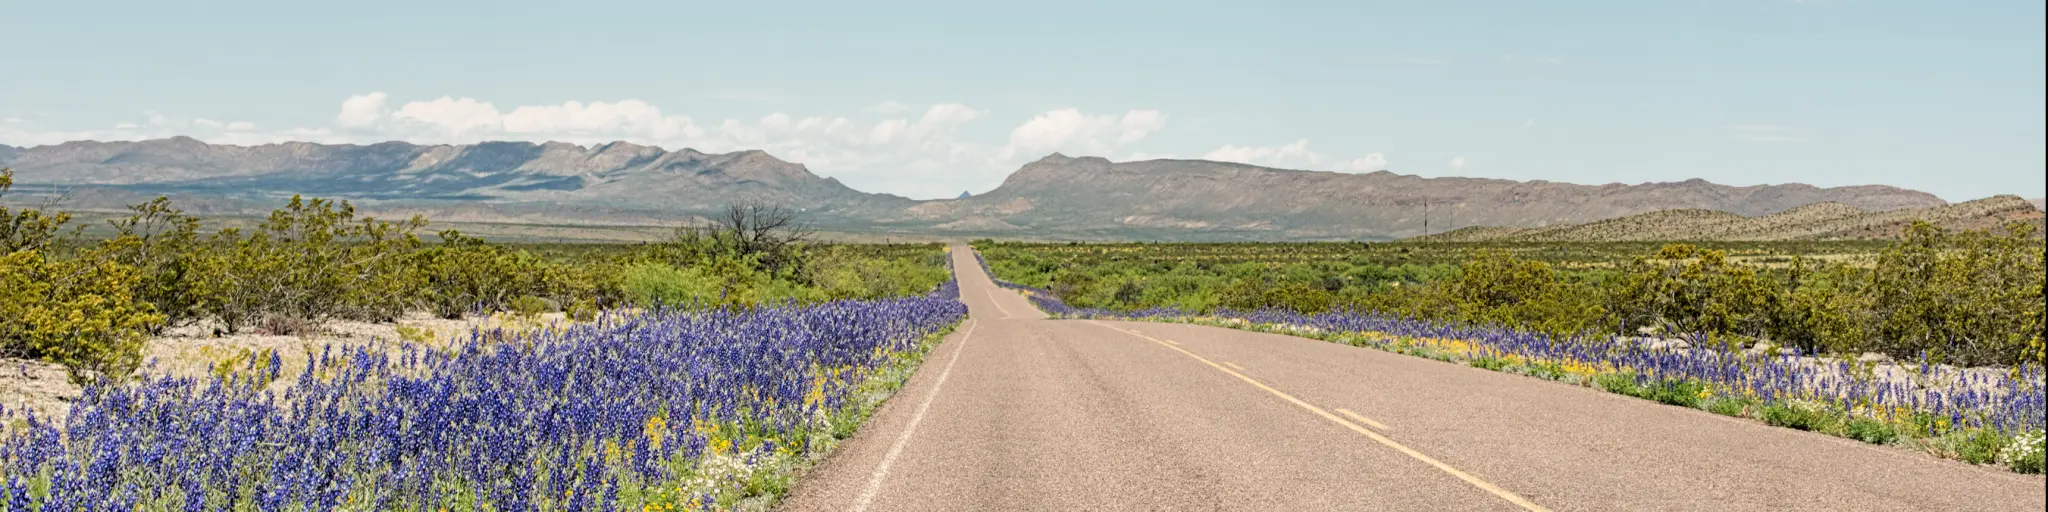 Bluebonnets growing along the roadside in Persimmon Gap on the edge of the Big Bend National Park in west Texas